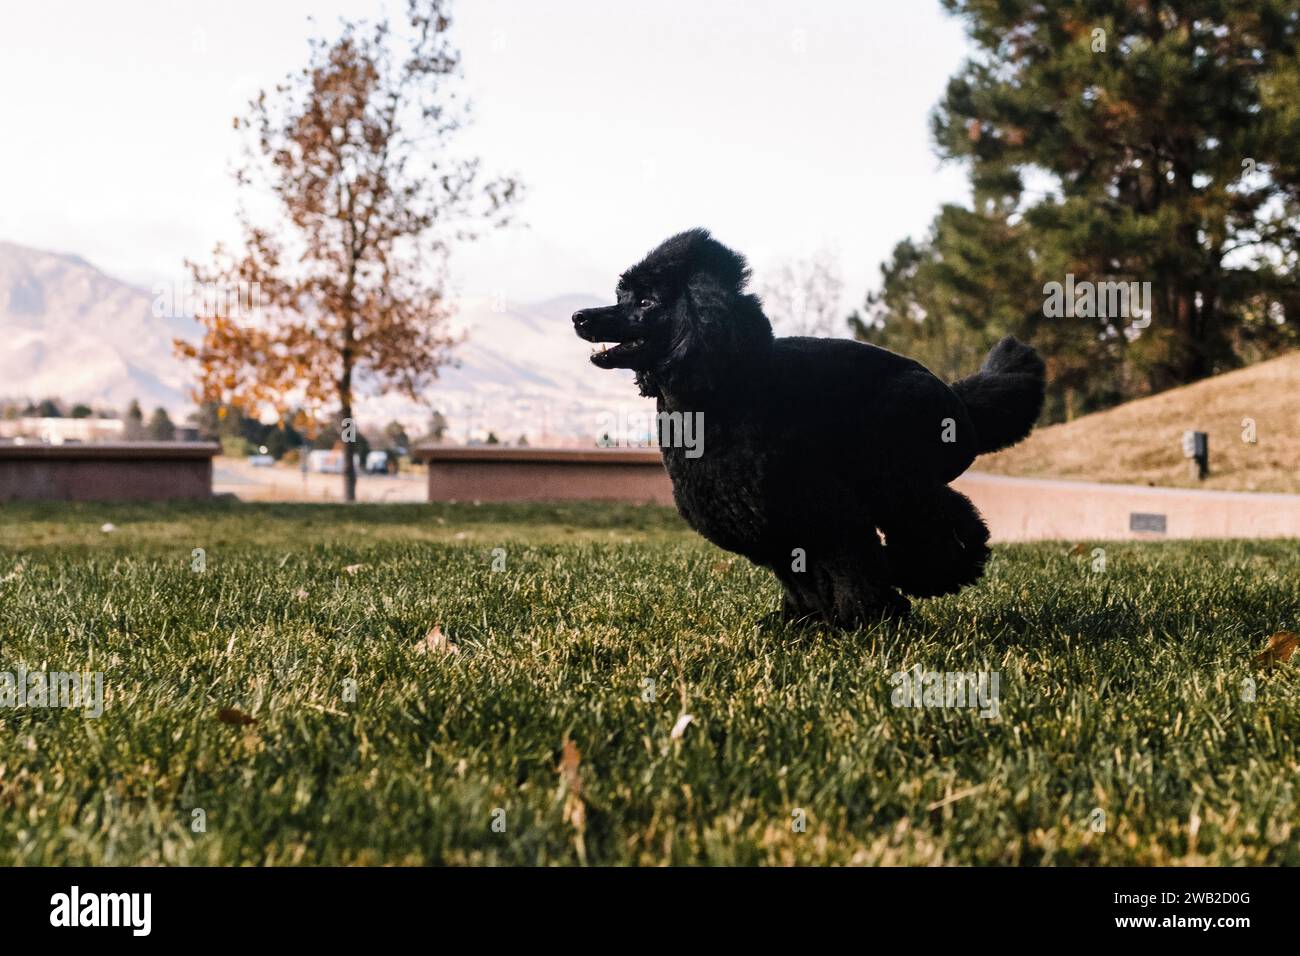 Black Miniature Poodle running and playing in grass in autumn Stock Photo